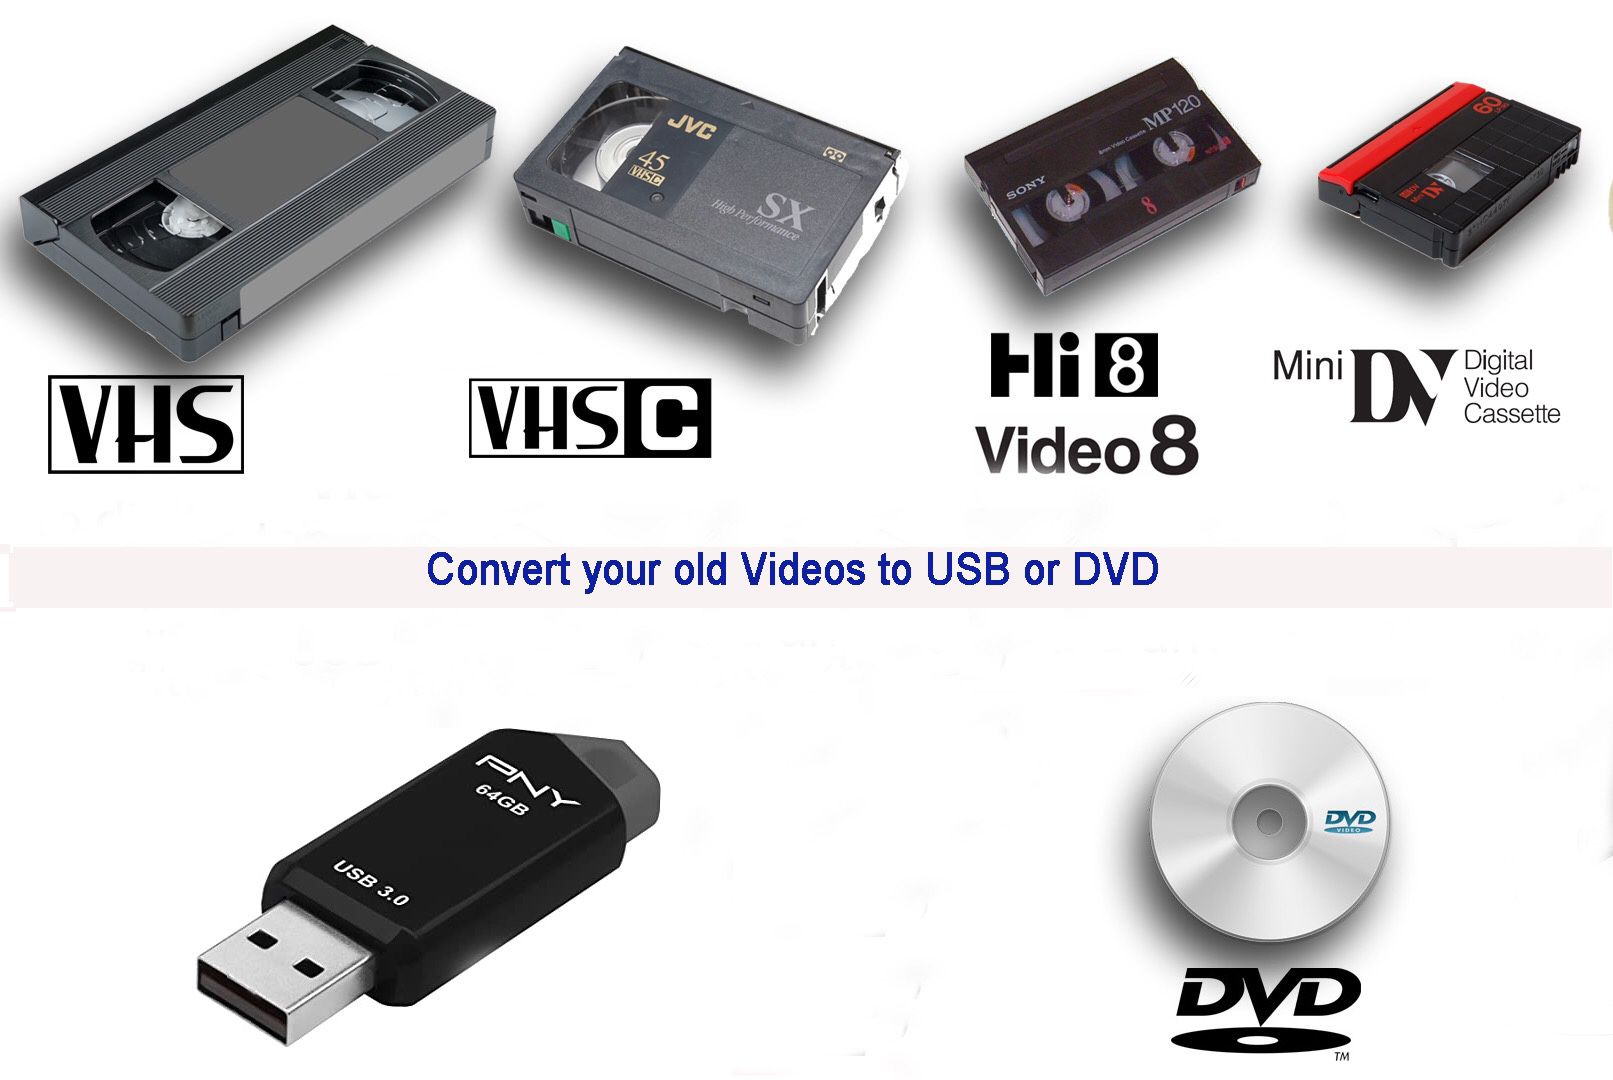 Transfer old videos to USB or DVD